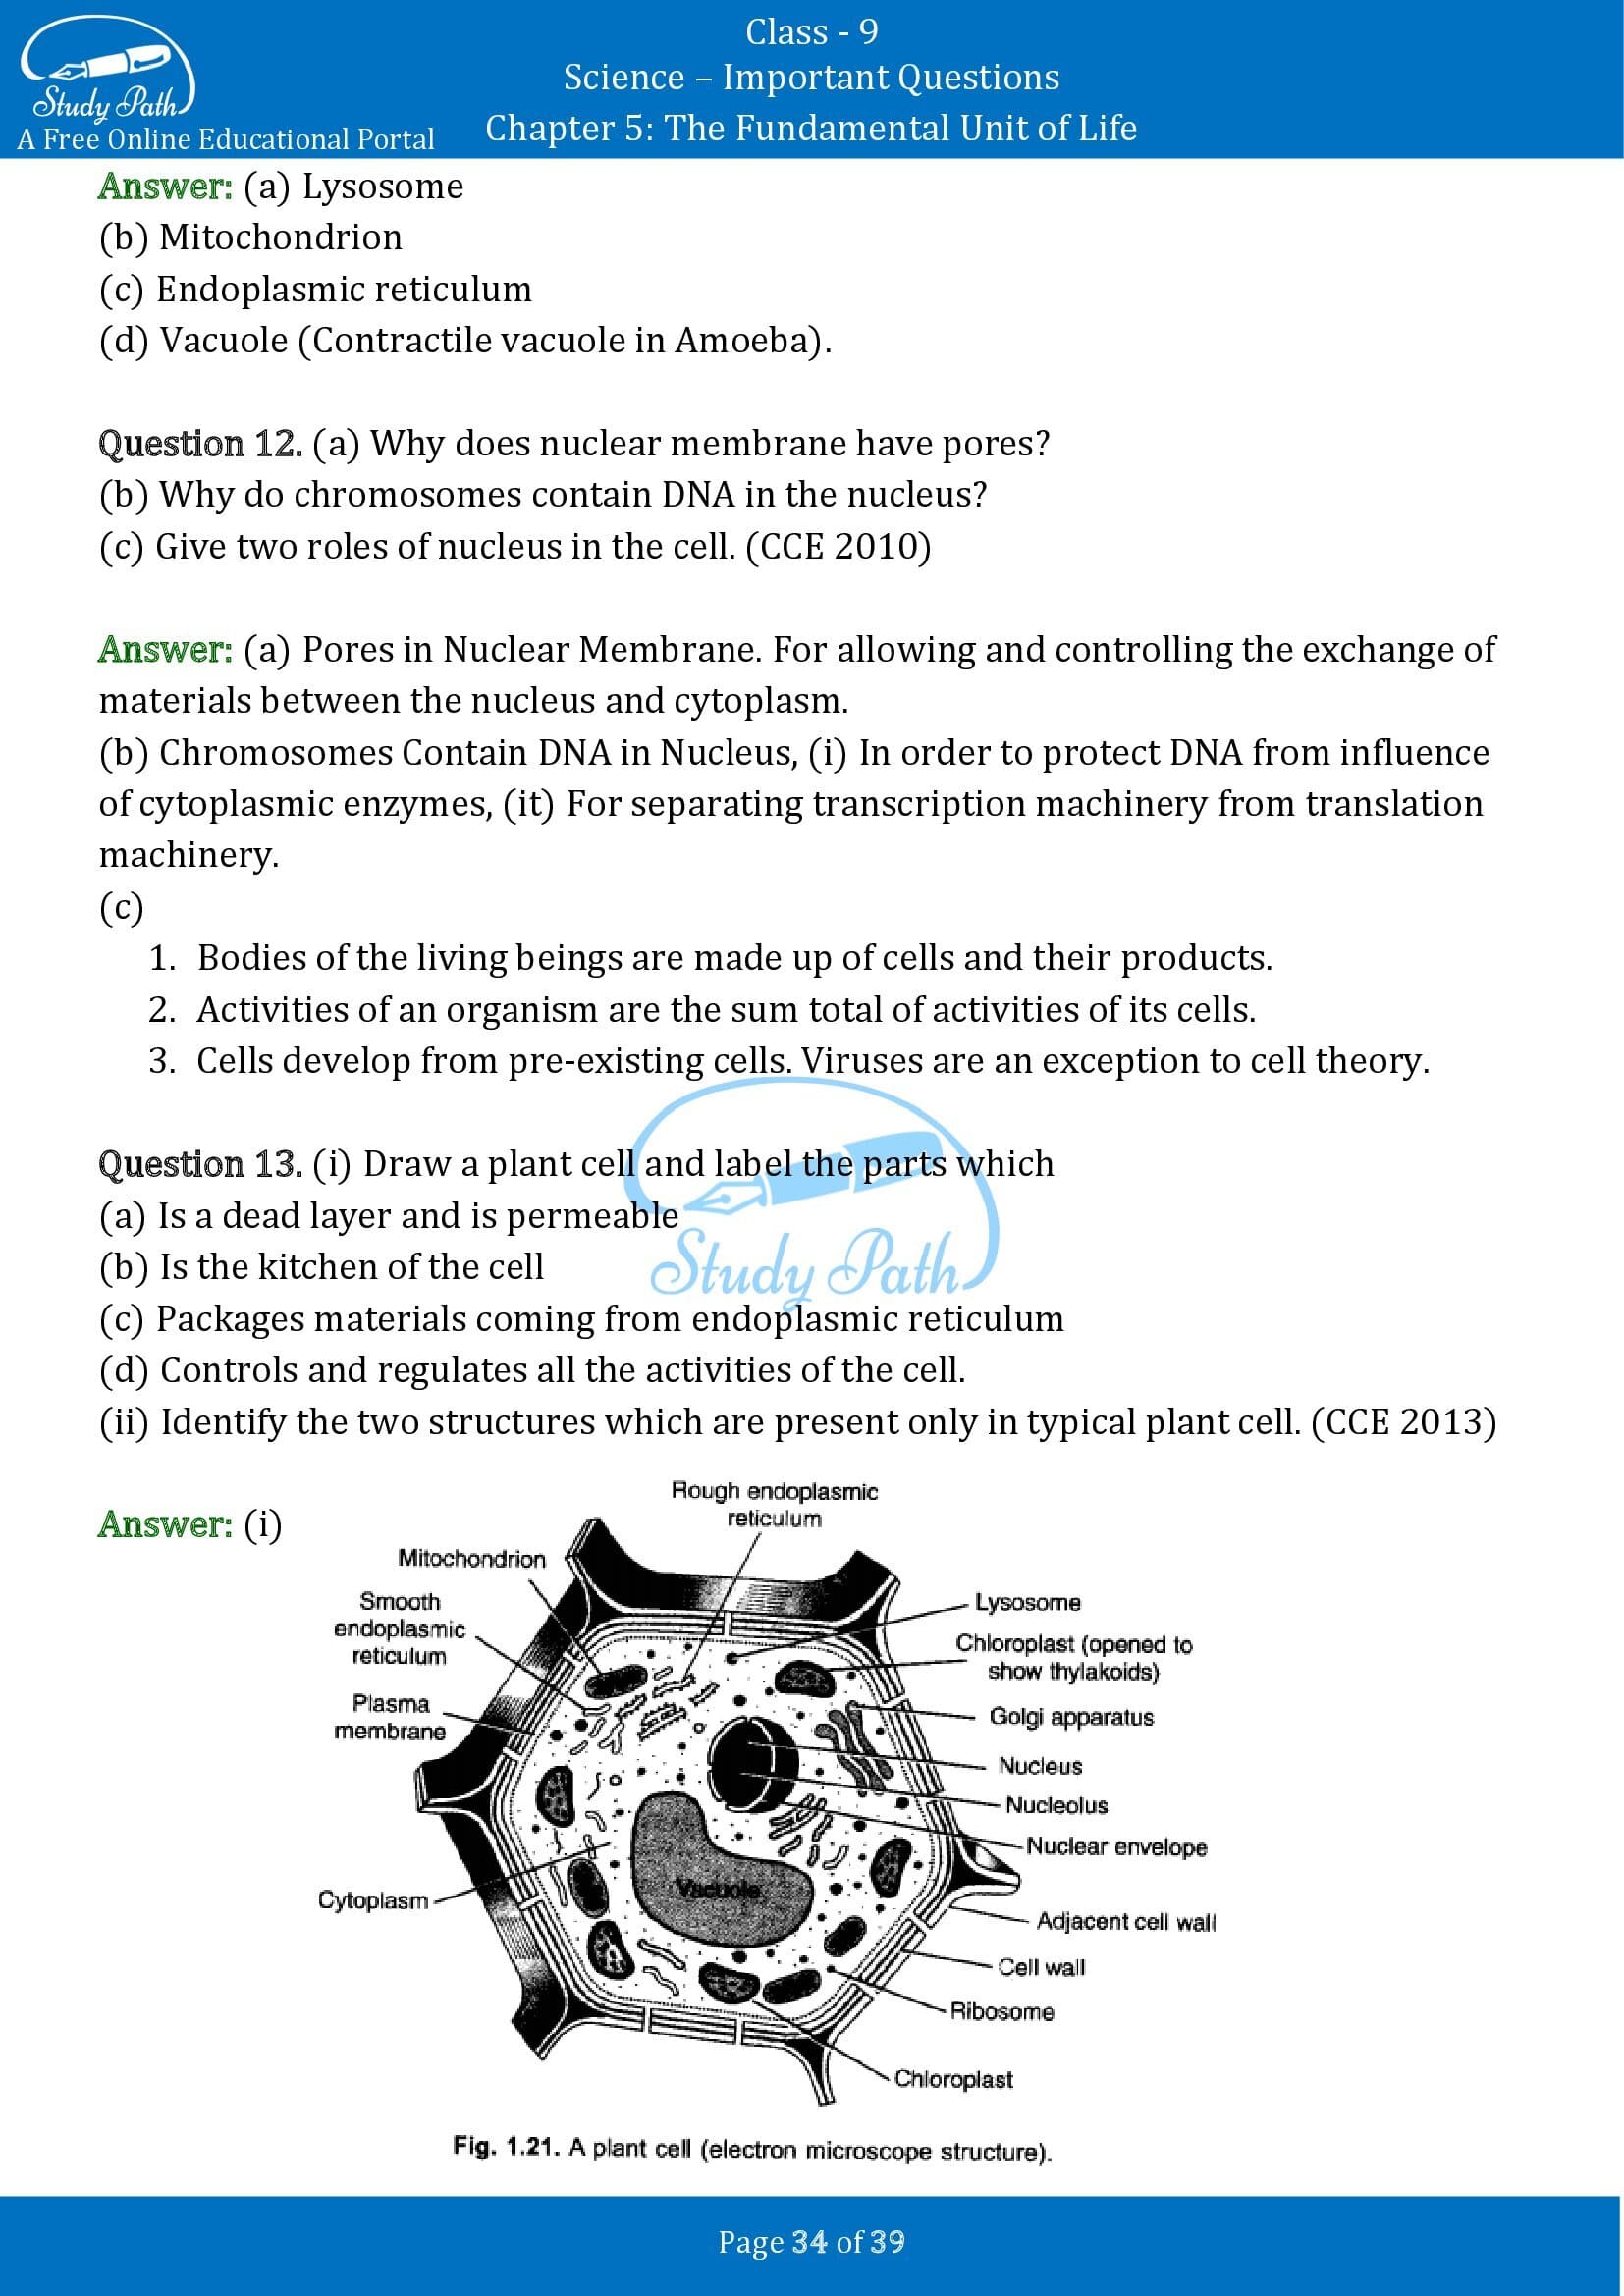 Important Questions for Class 9 Science Chapter 5 The Fundamental Unit of Life 00034